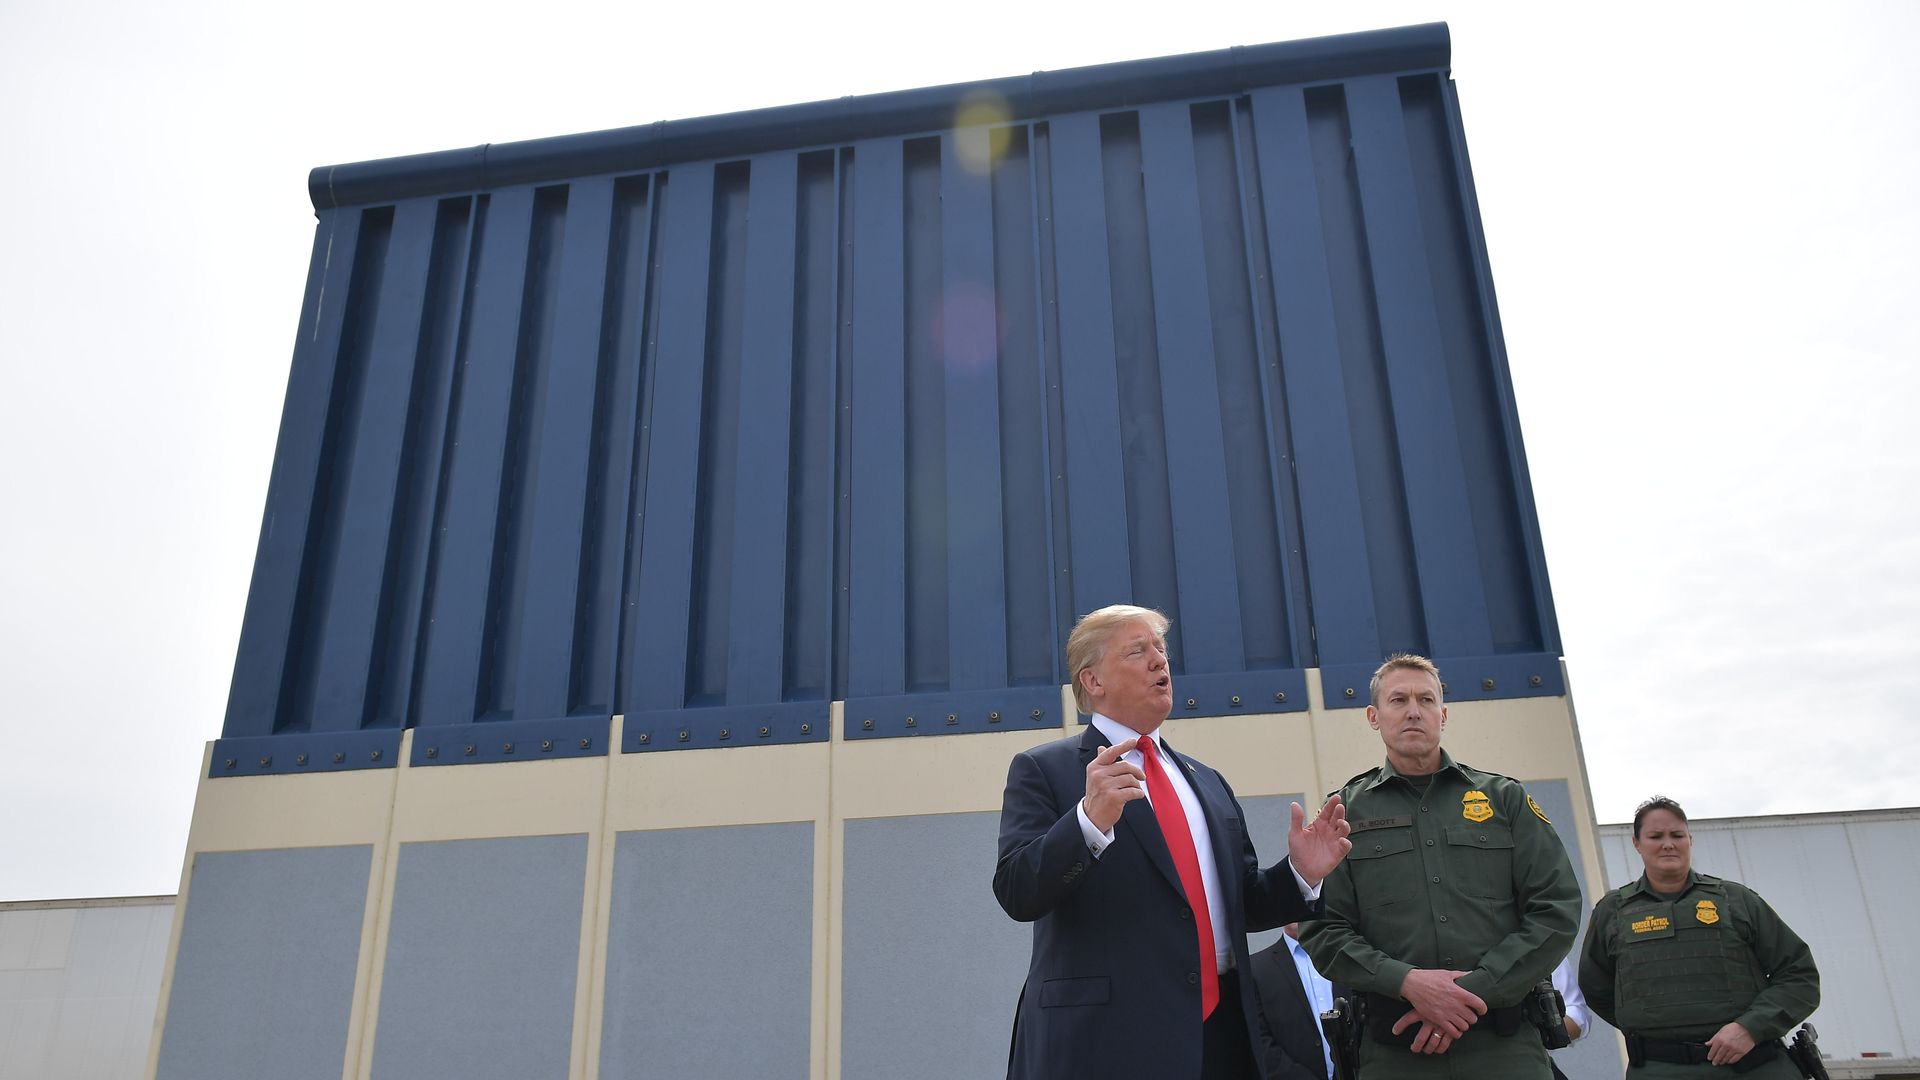 In this image, Trump talks while standing next to two border patrol officers in front of a test segment of border wall.